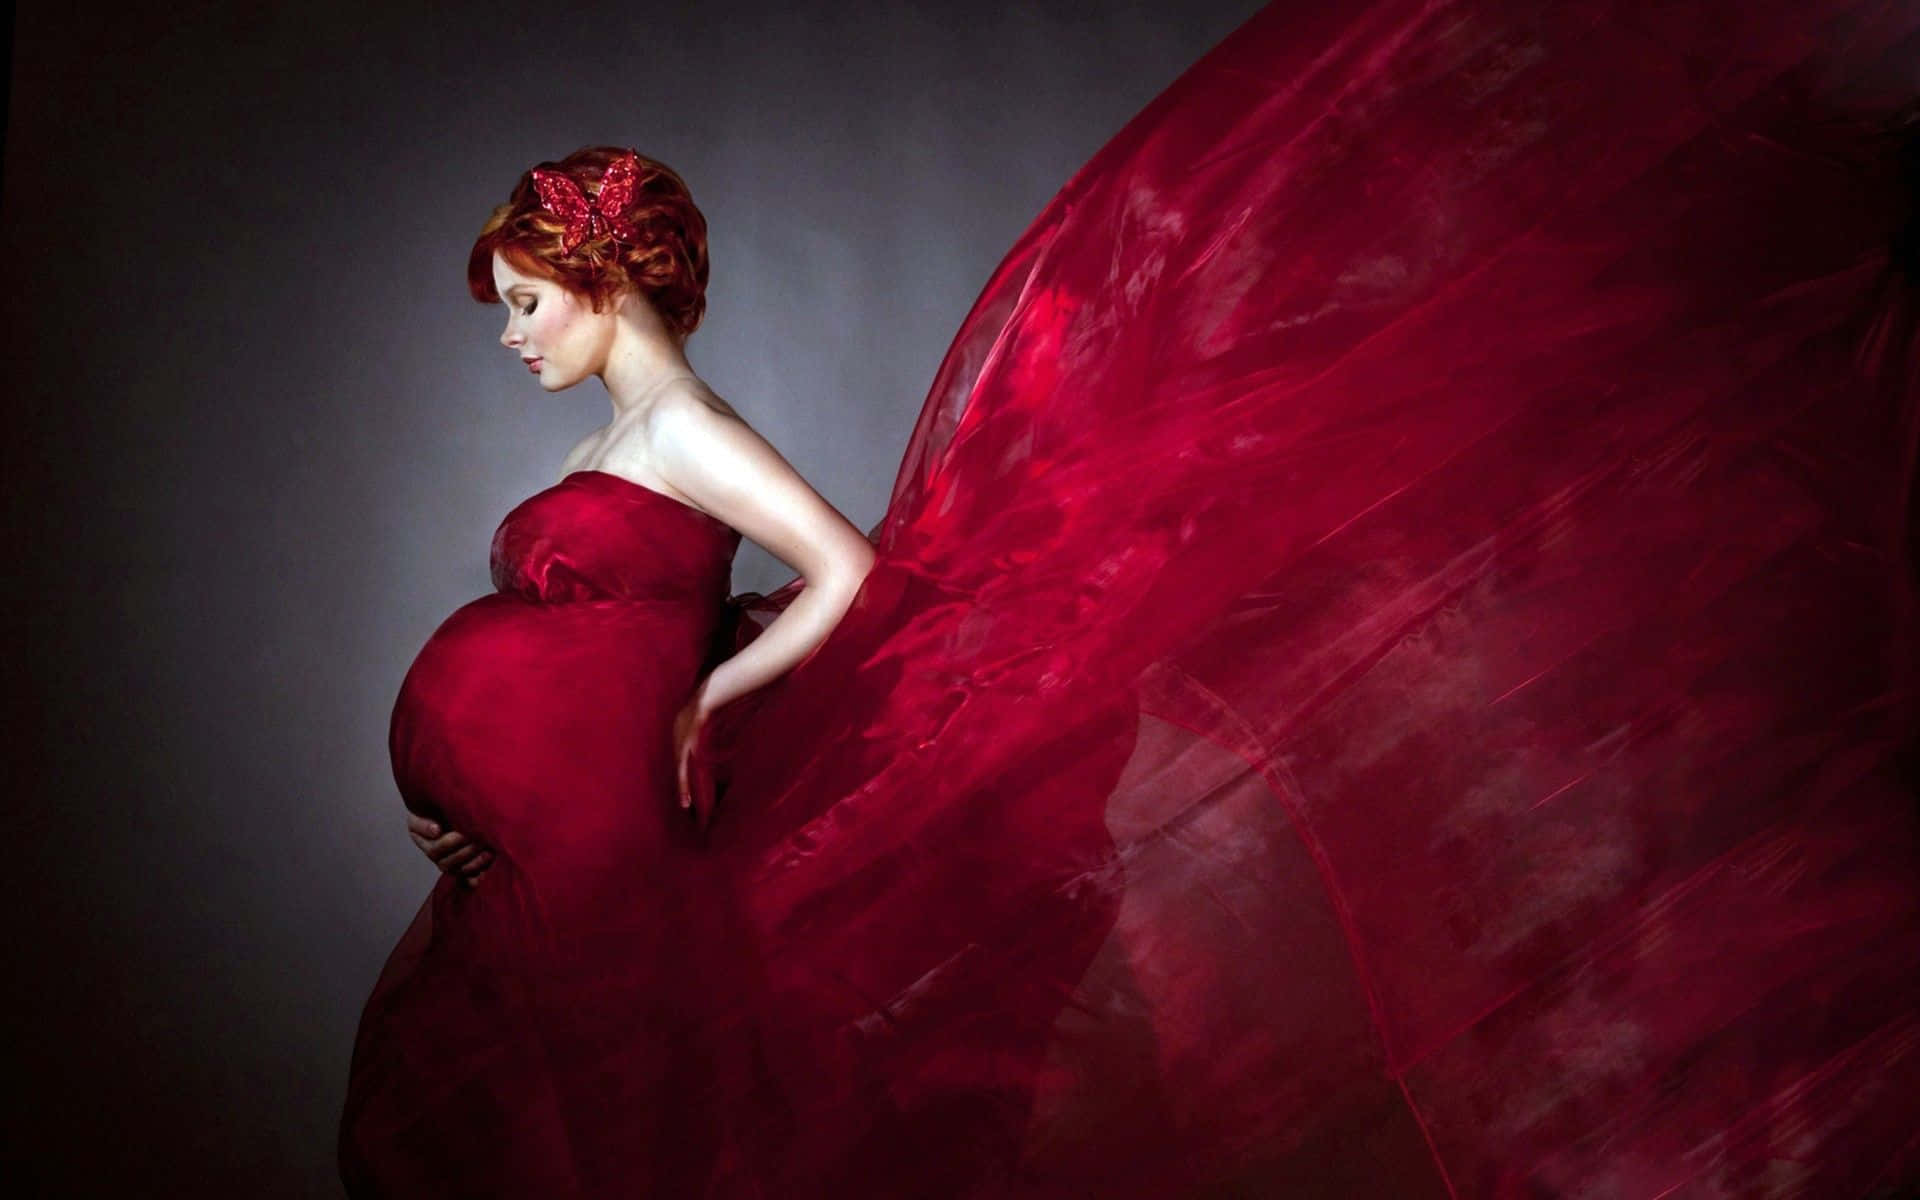 Caption: Blooming in Red - A Radiant Pregnant Woman Wallpaper